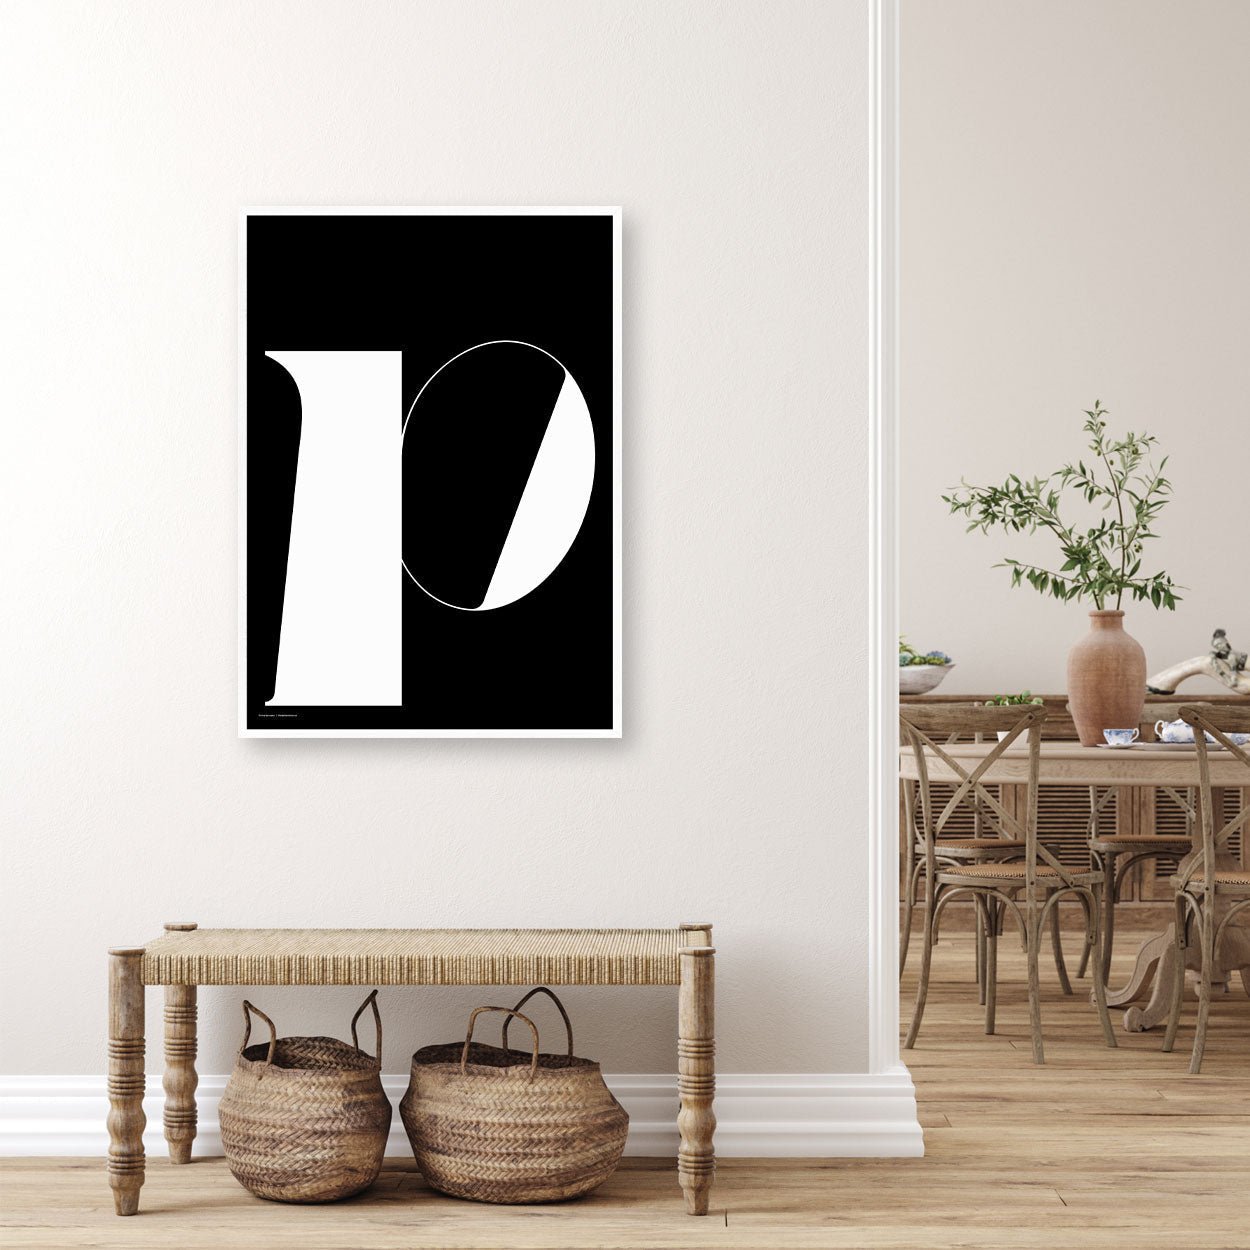  Collection P - Haphazard Artist Emma Sprouster The alphabet store 